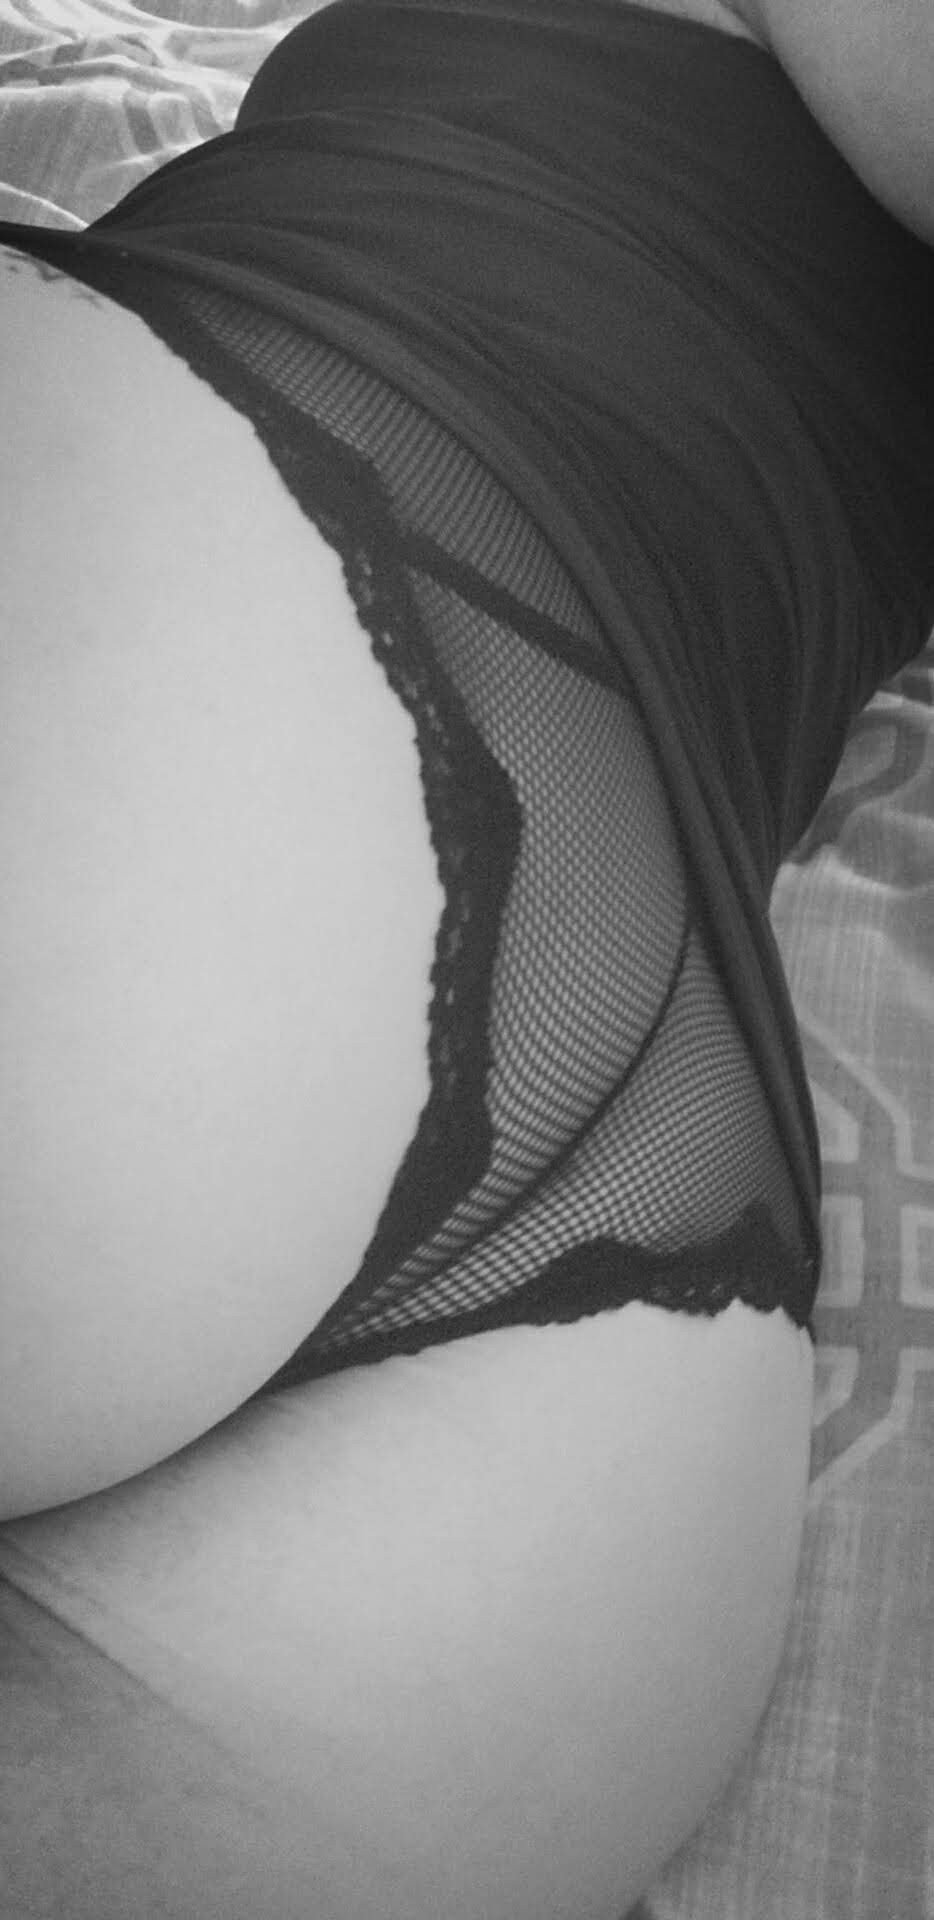 Watch the Photo by Cumslut92 with the username @Cumslut92, posted on November 1, 2020. The post is about the topic Ass. and the text says '#ass #lace #underwear'